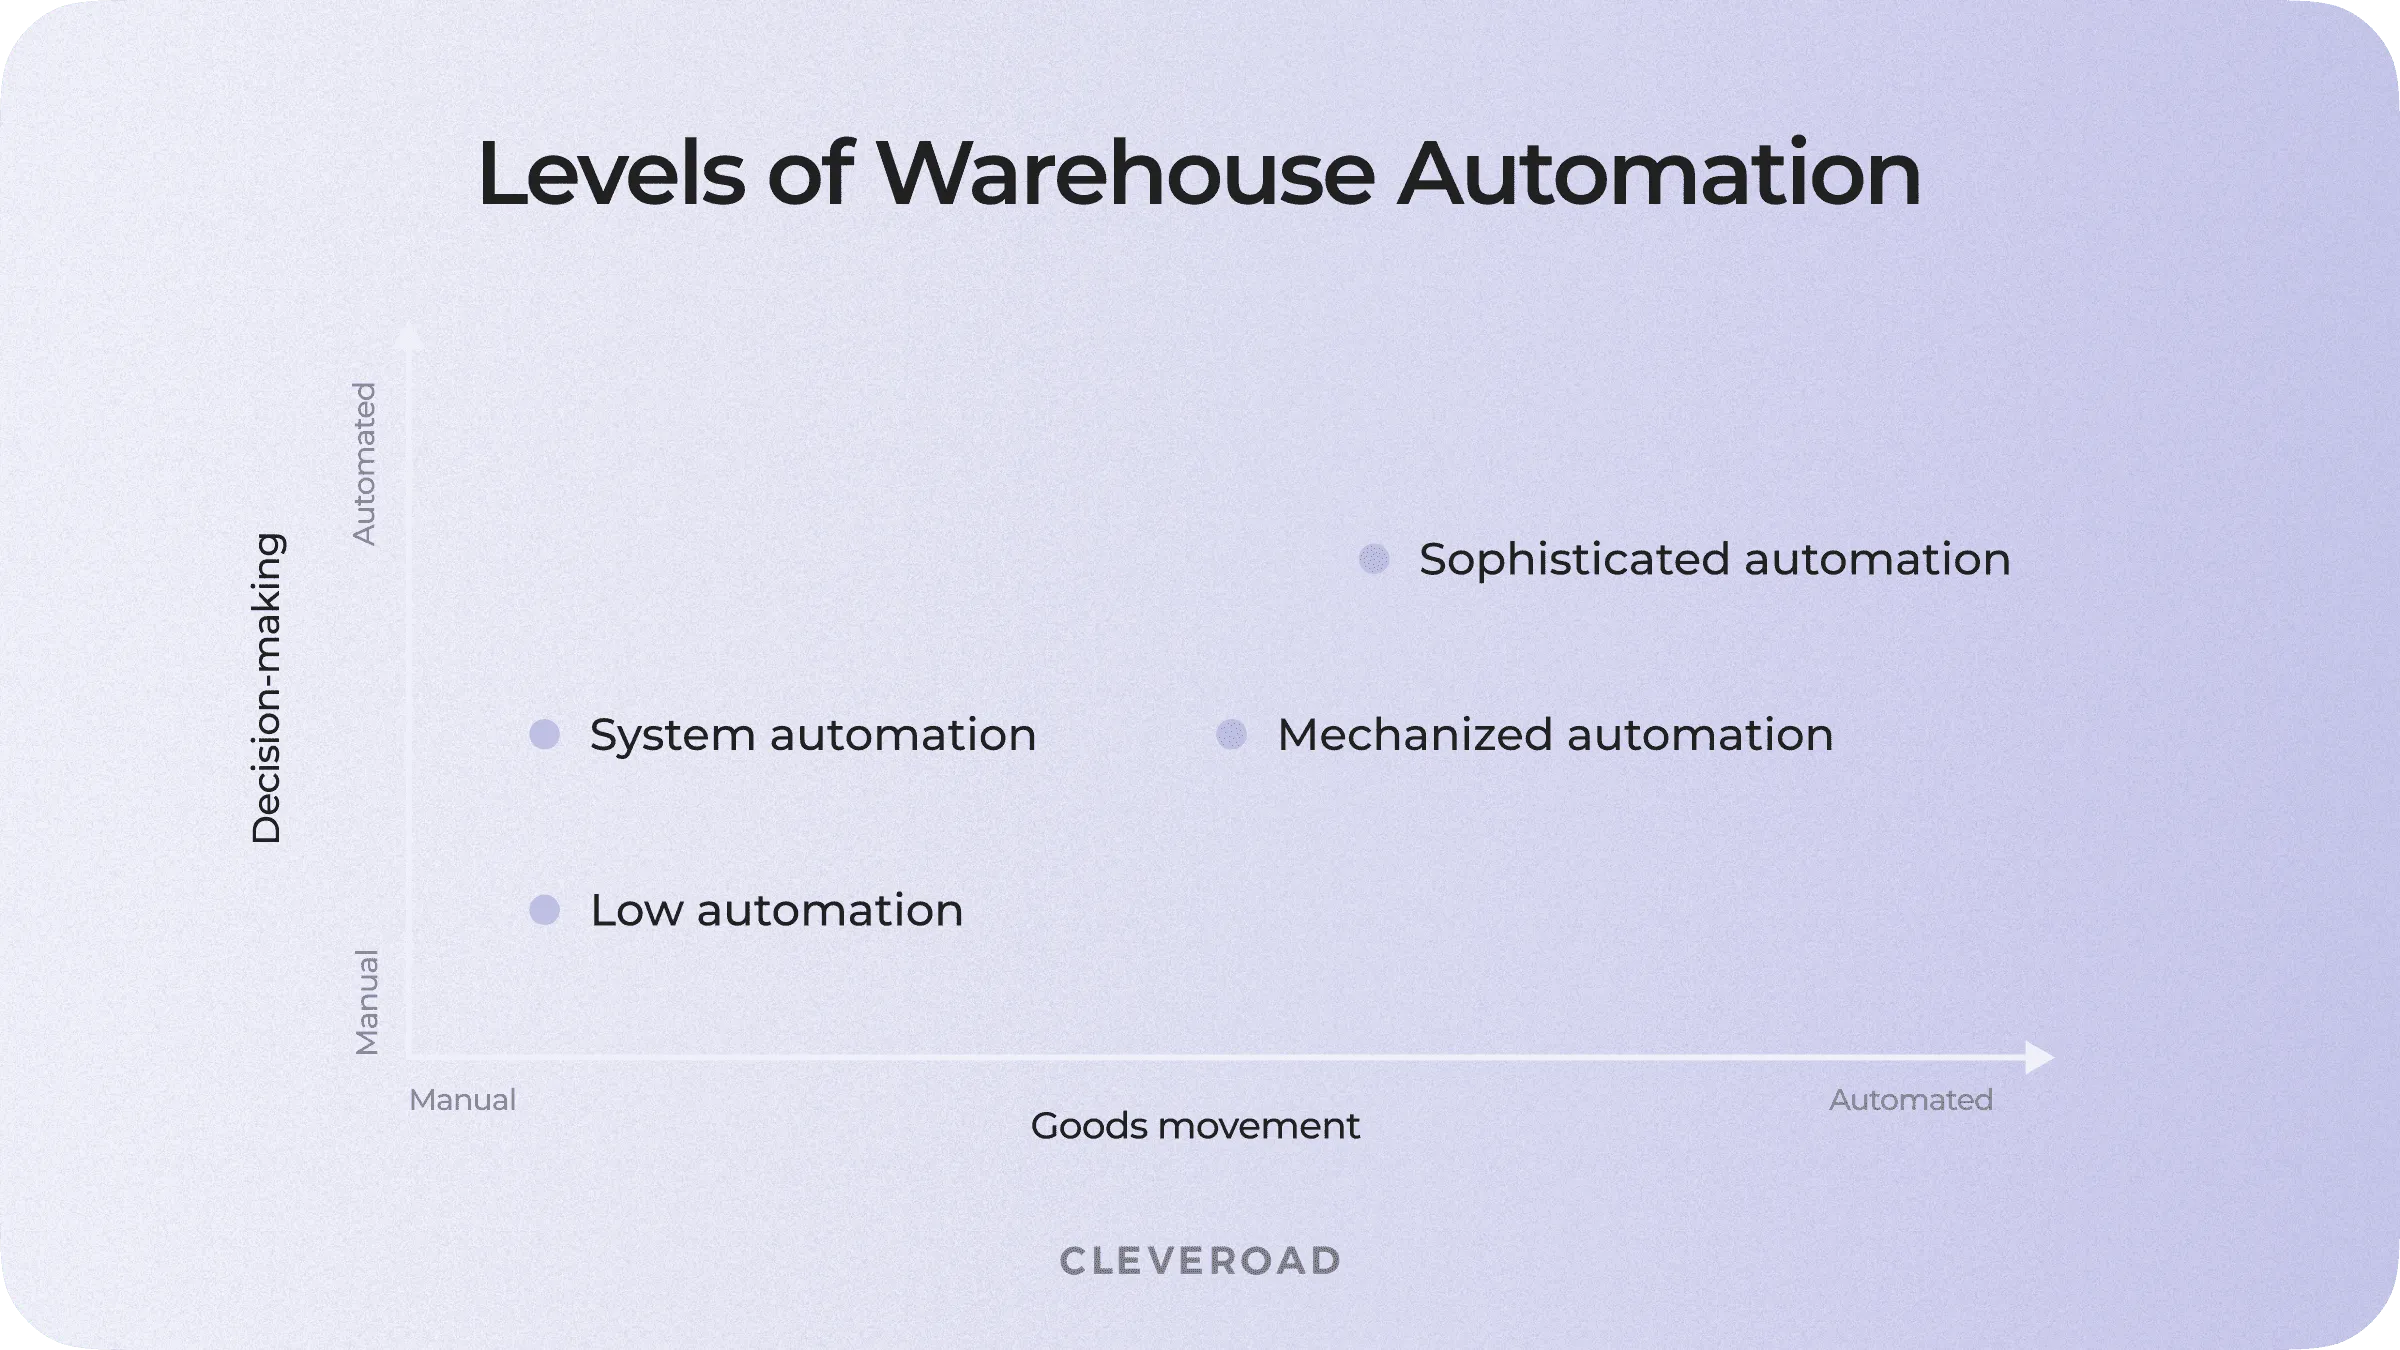 Warehouse automation by levels